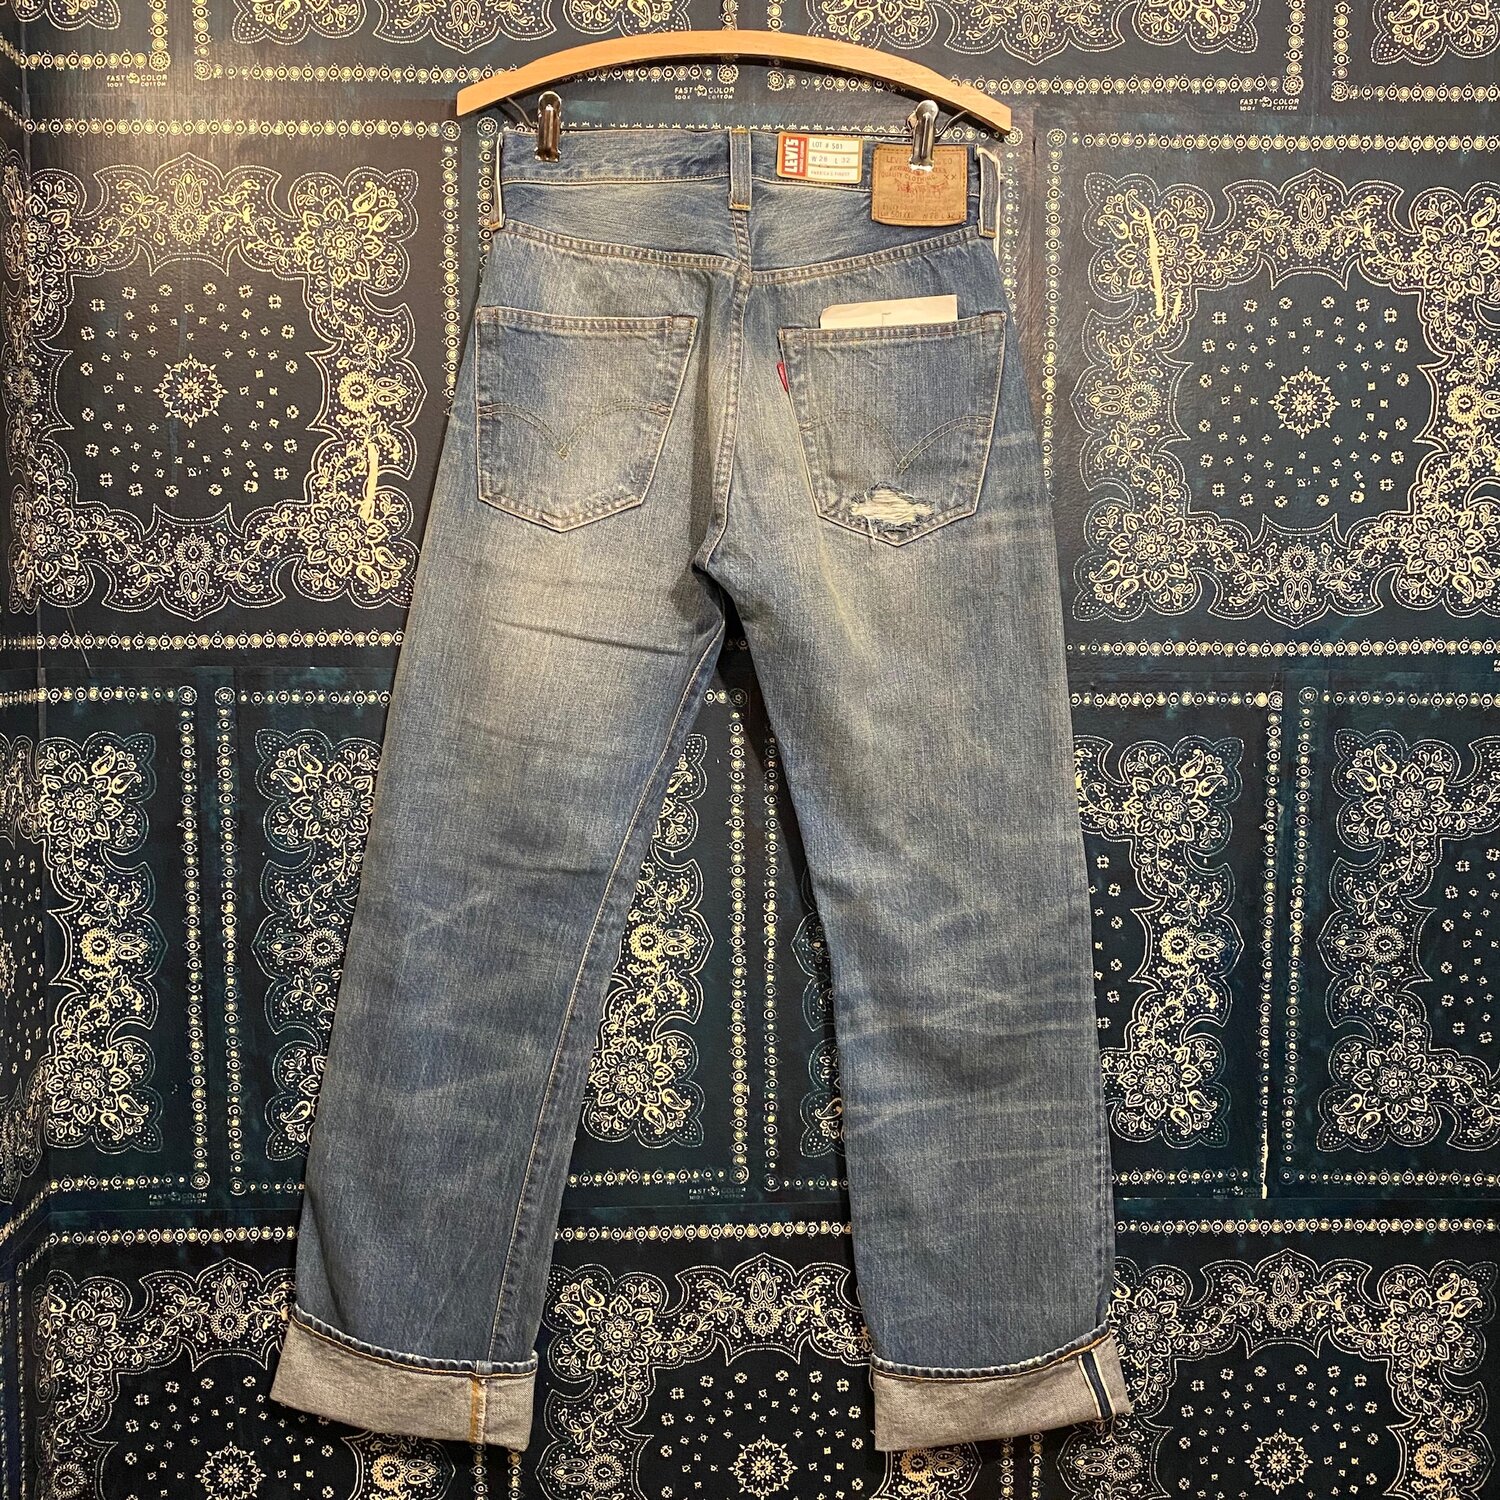 Distant Thereby Discard LVC Cone Denim 1947 501 // size 28 x 32 — Mello and Sons